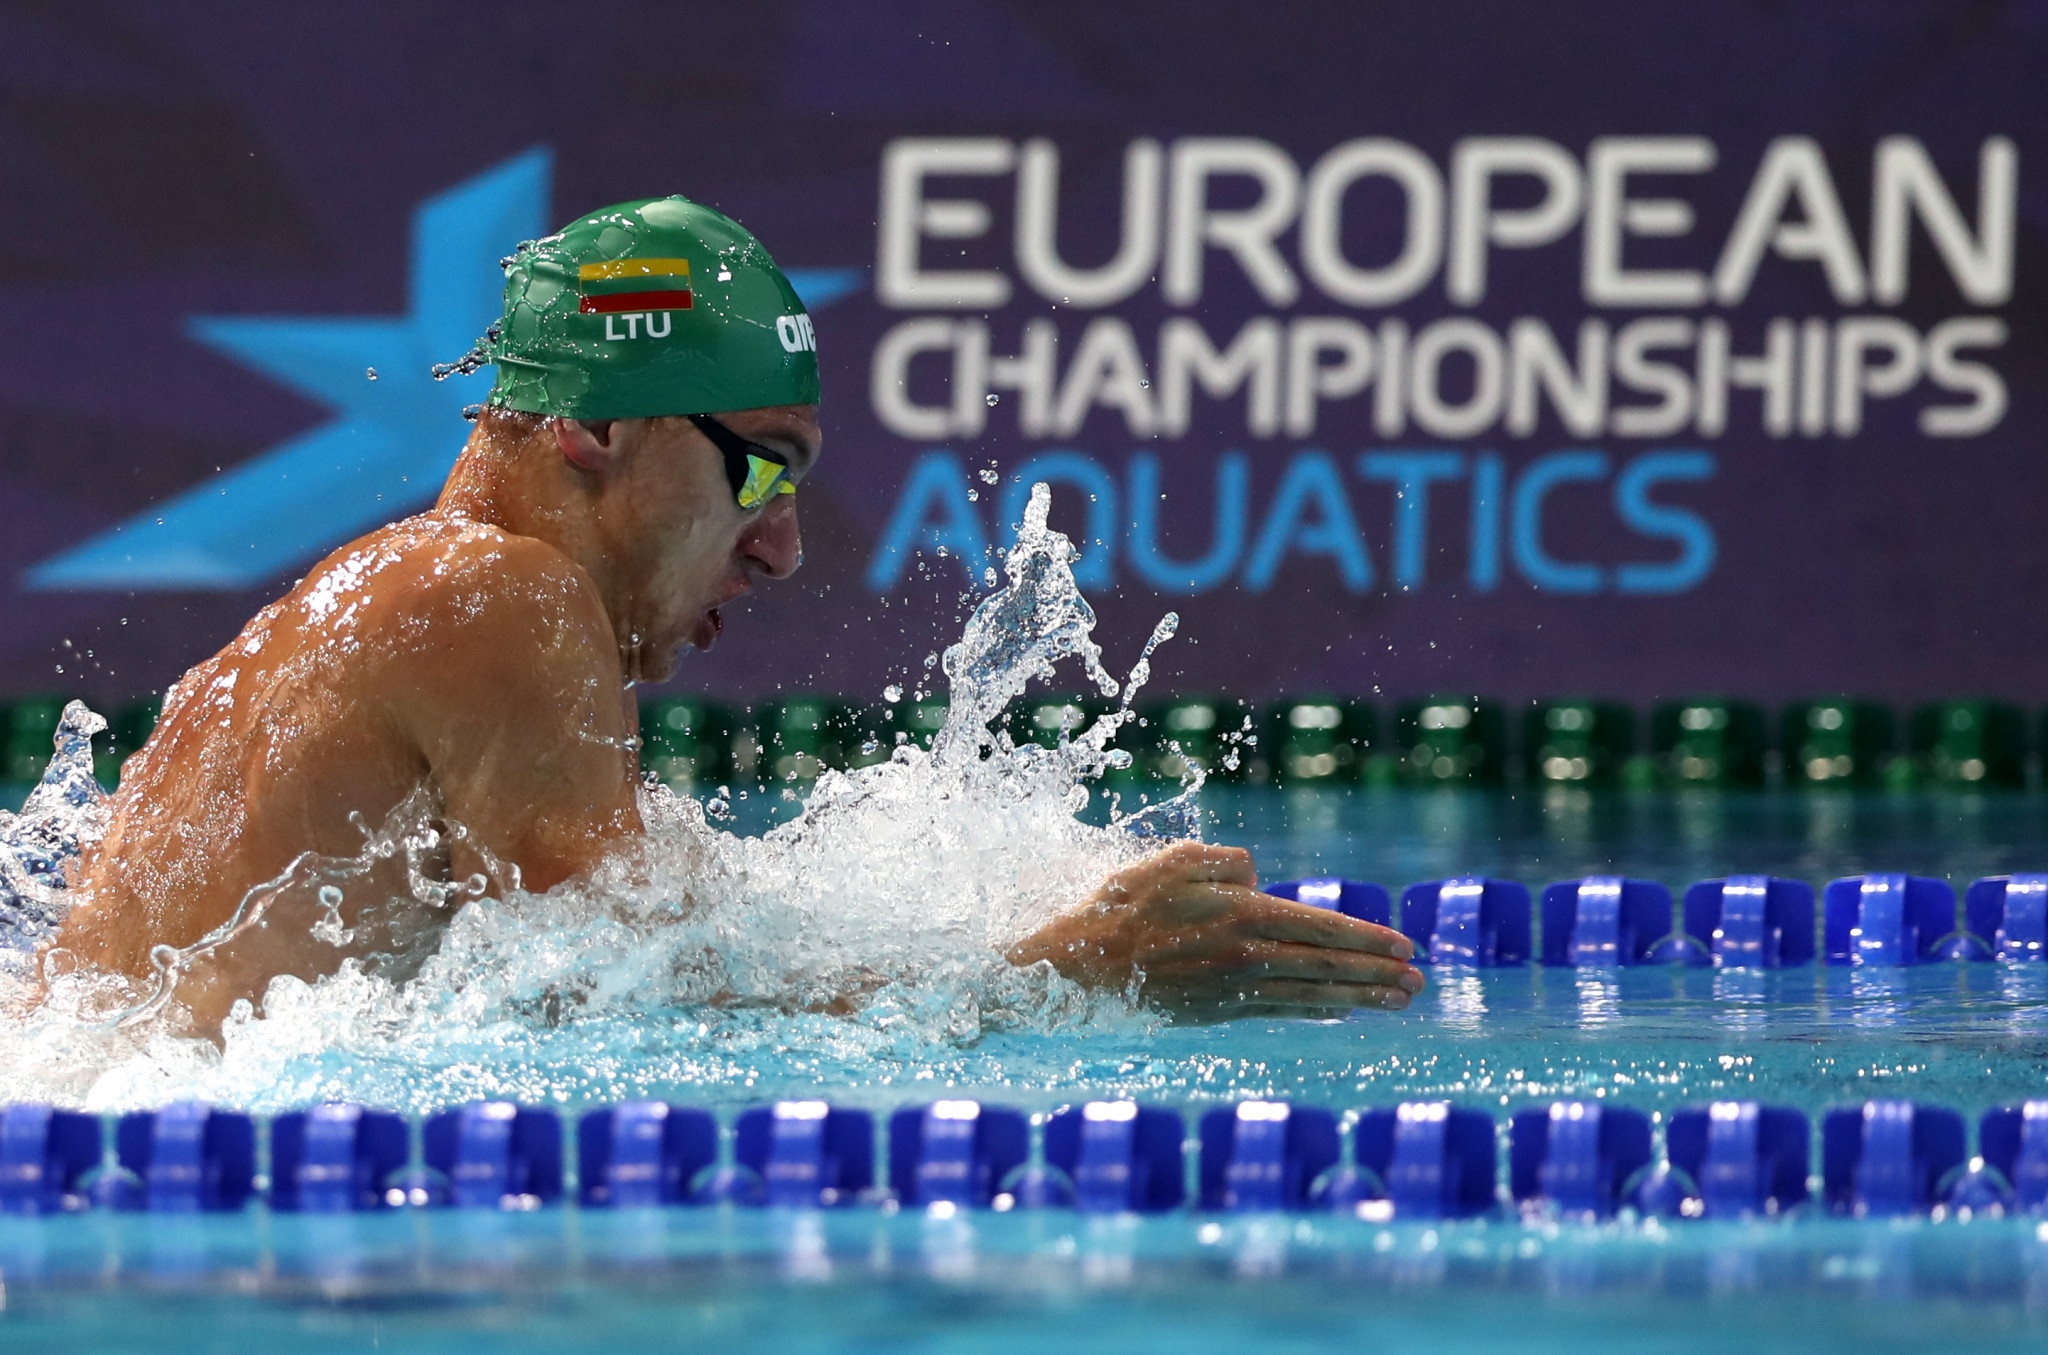 MicroPlus' services were used at the 2018 European Aquatics Championships in Glasgow ©Getty Images